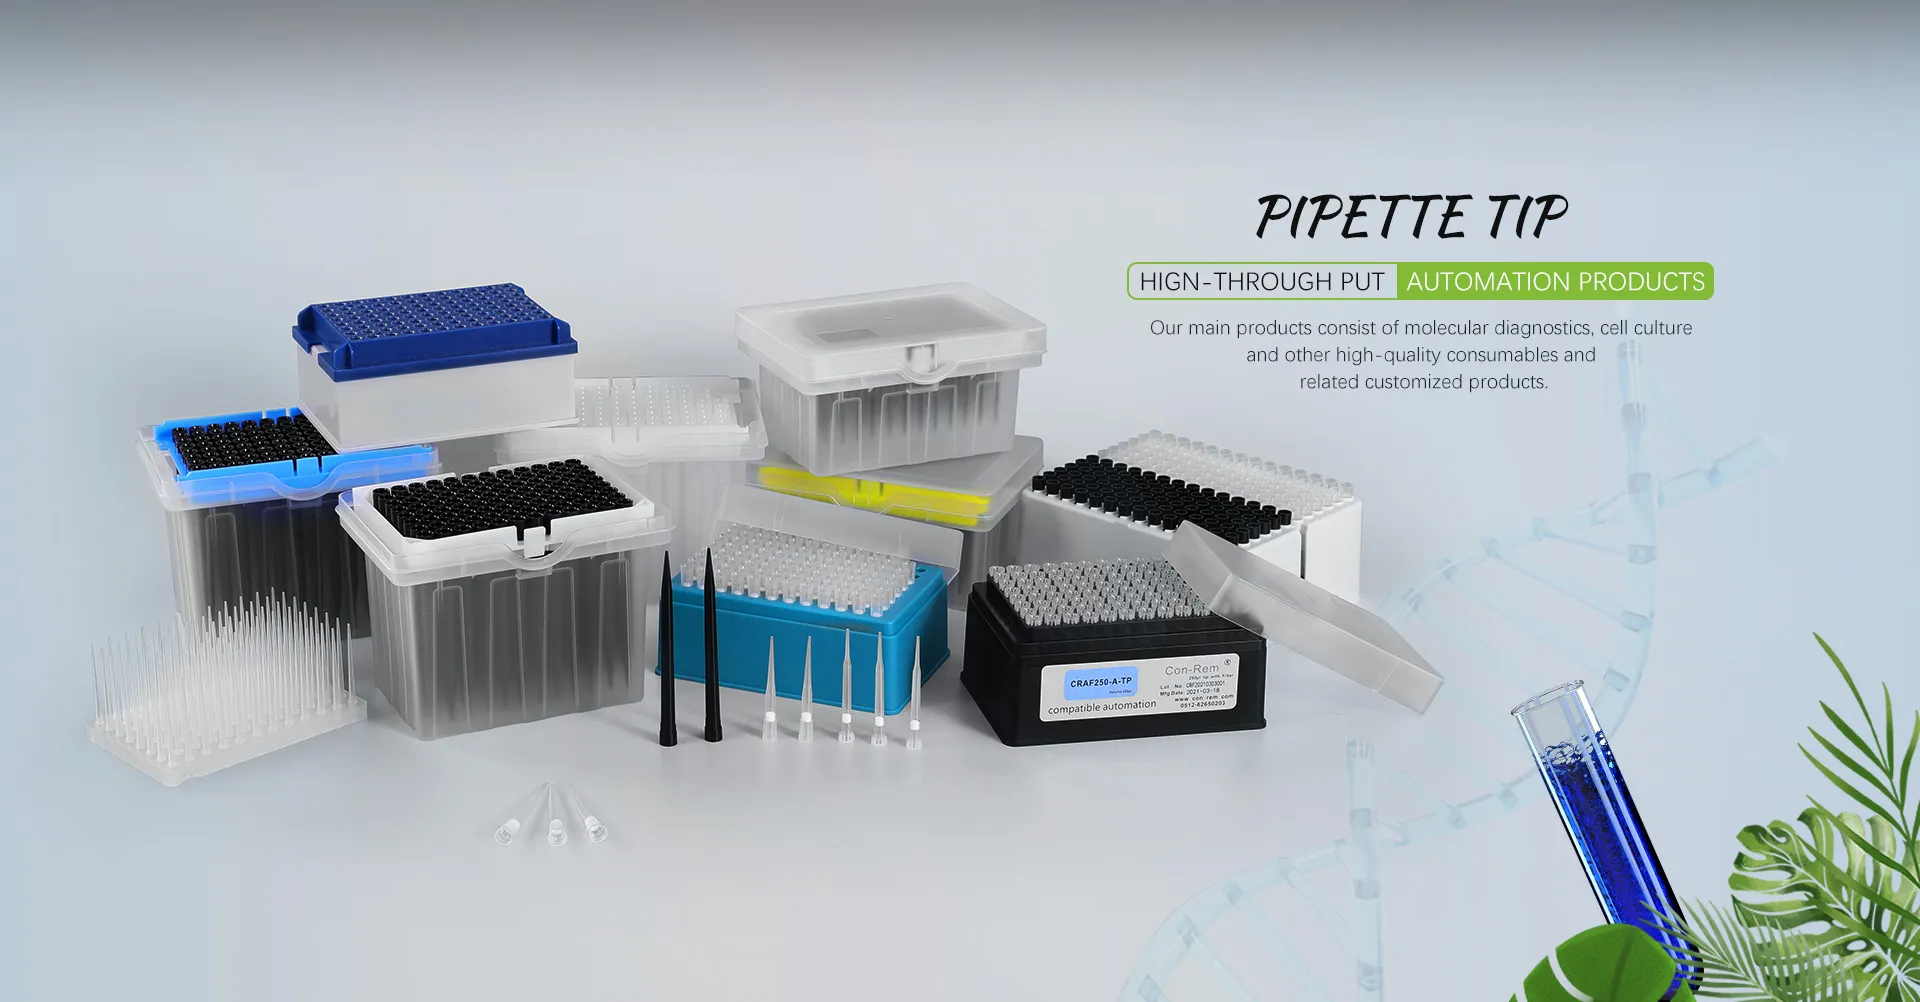 China Automated Pipette Tip Manufacturers and Suppliers